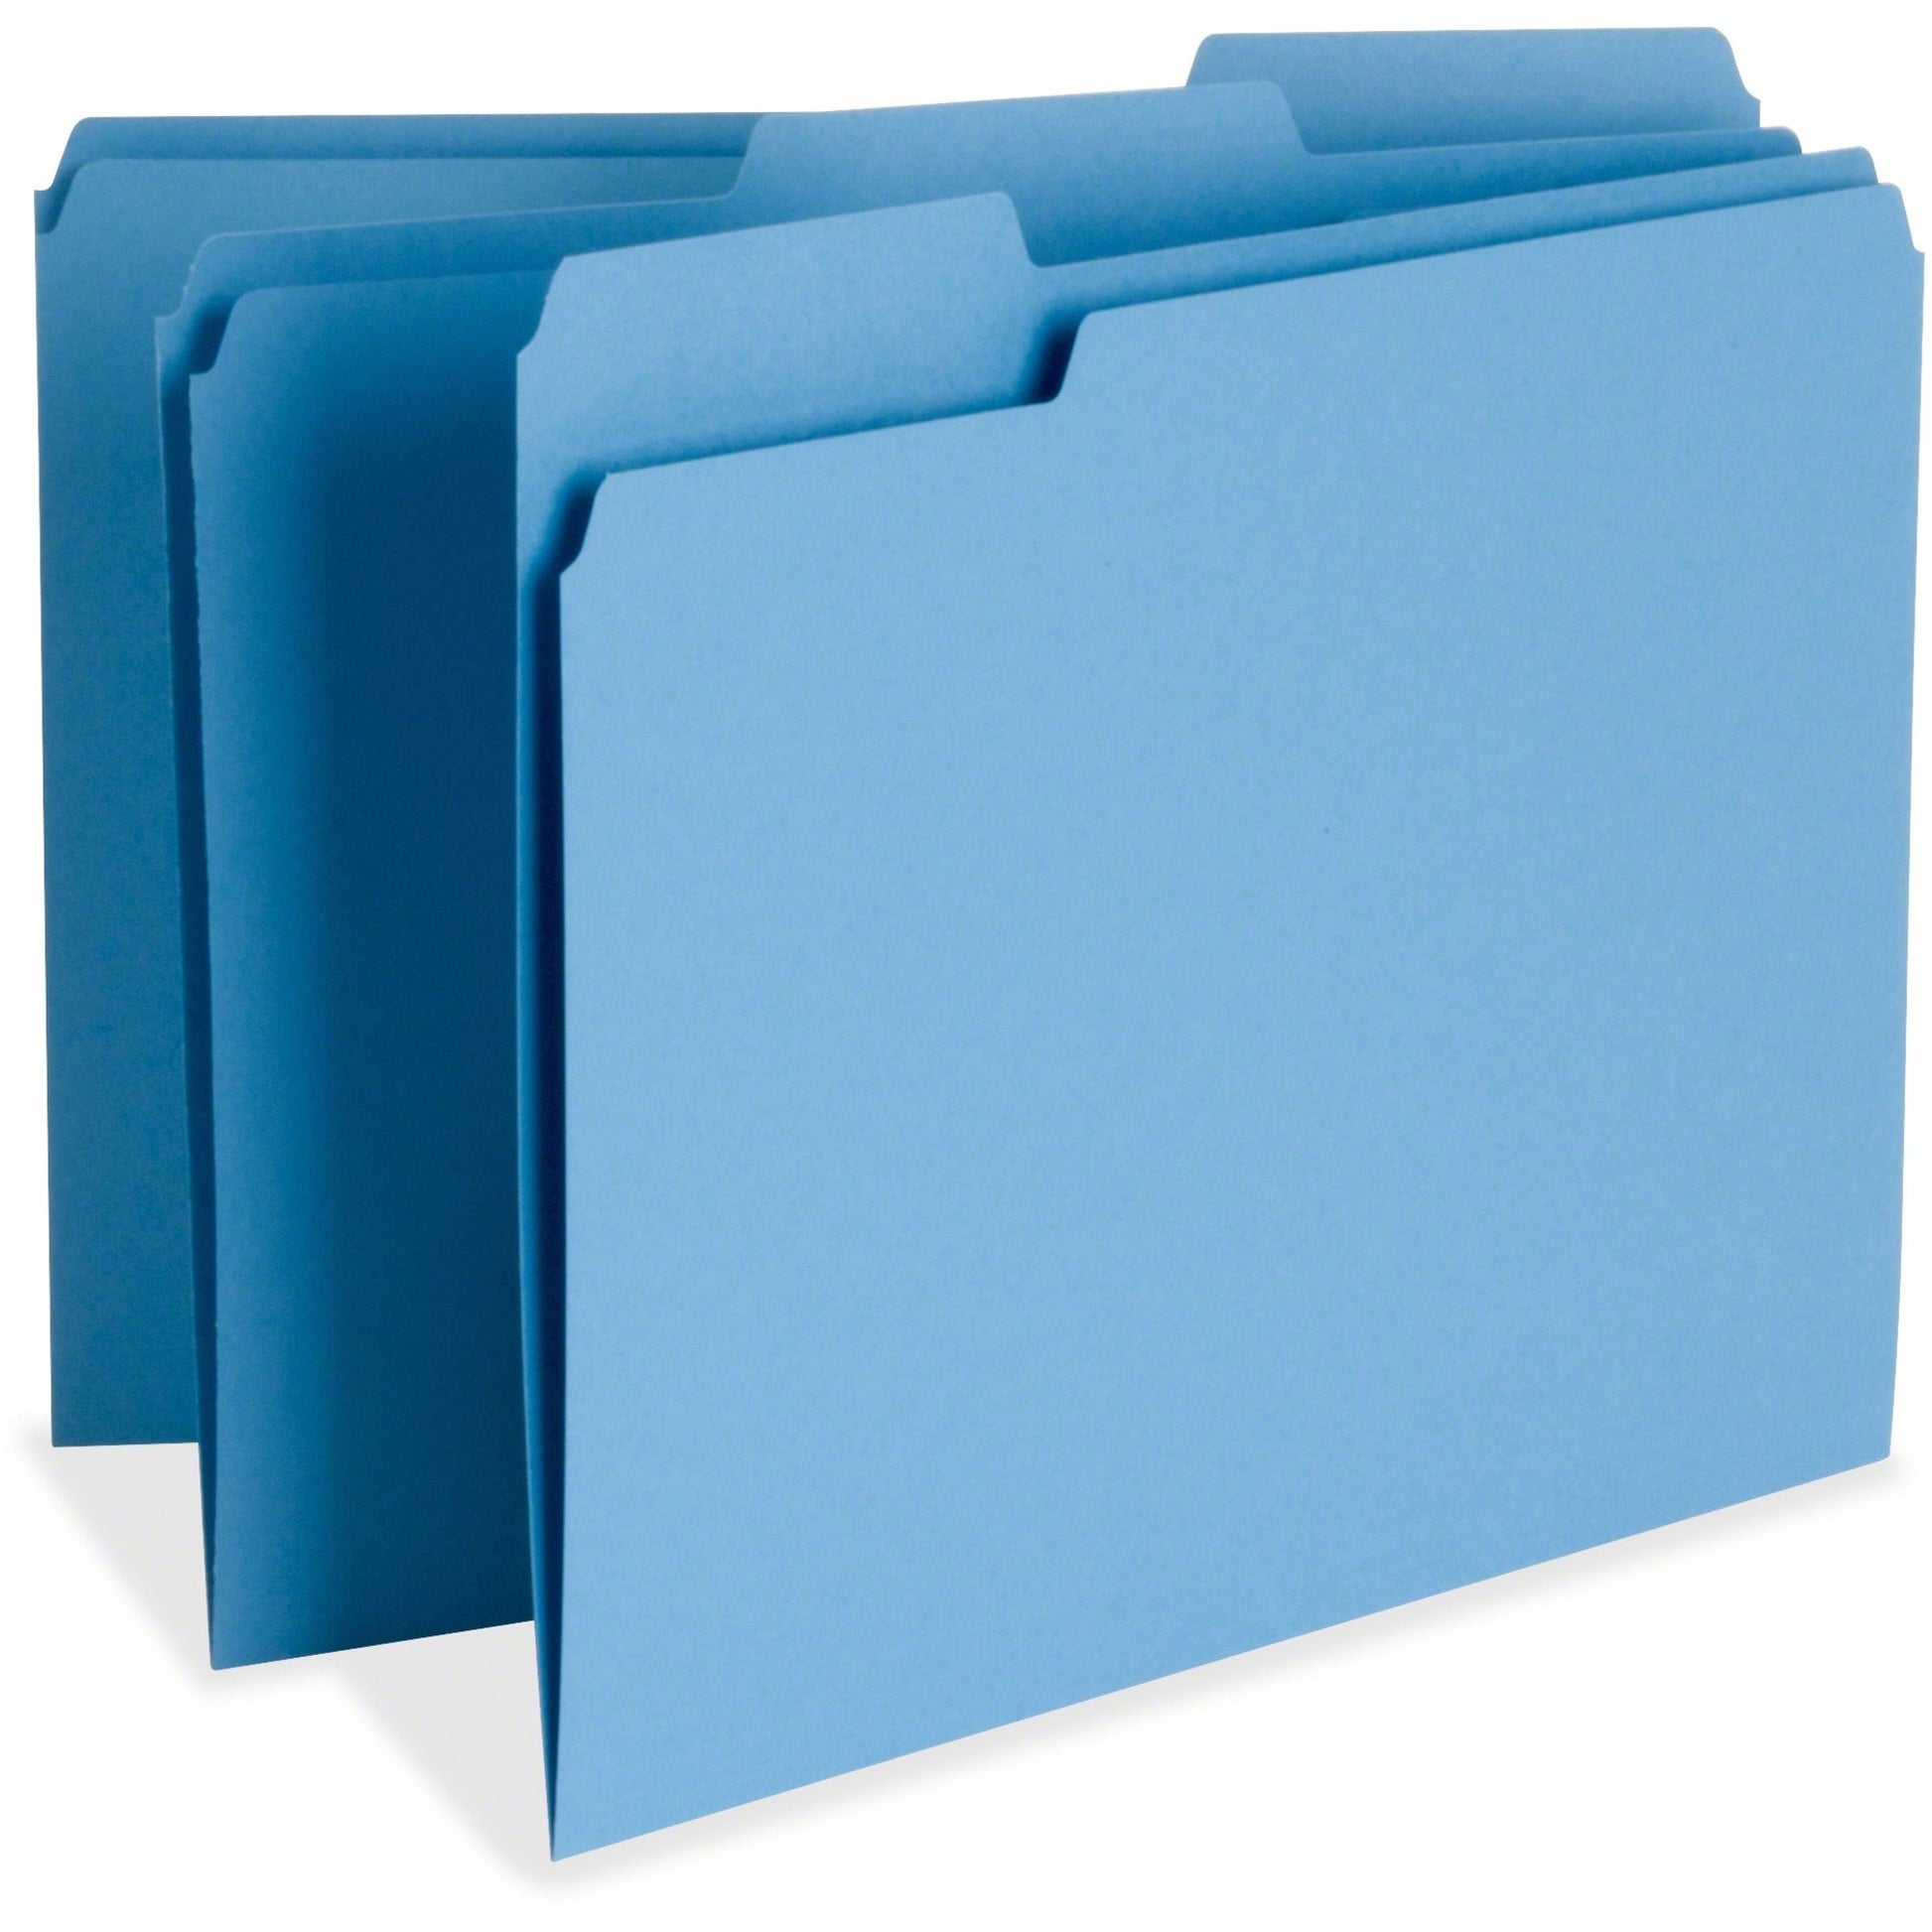 Business Source 1/3 Tab Cut Letter Recycled Top Tab File Folder